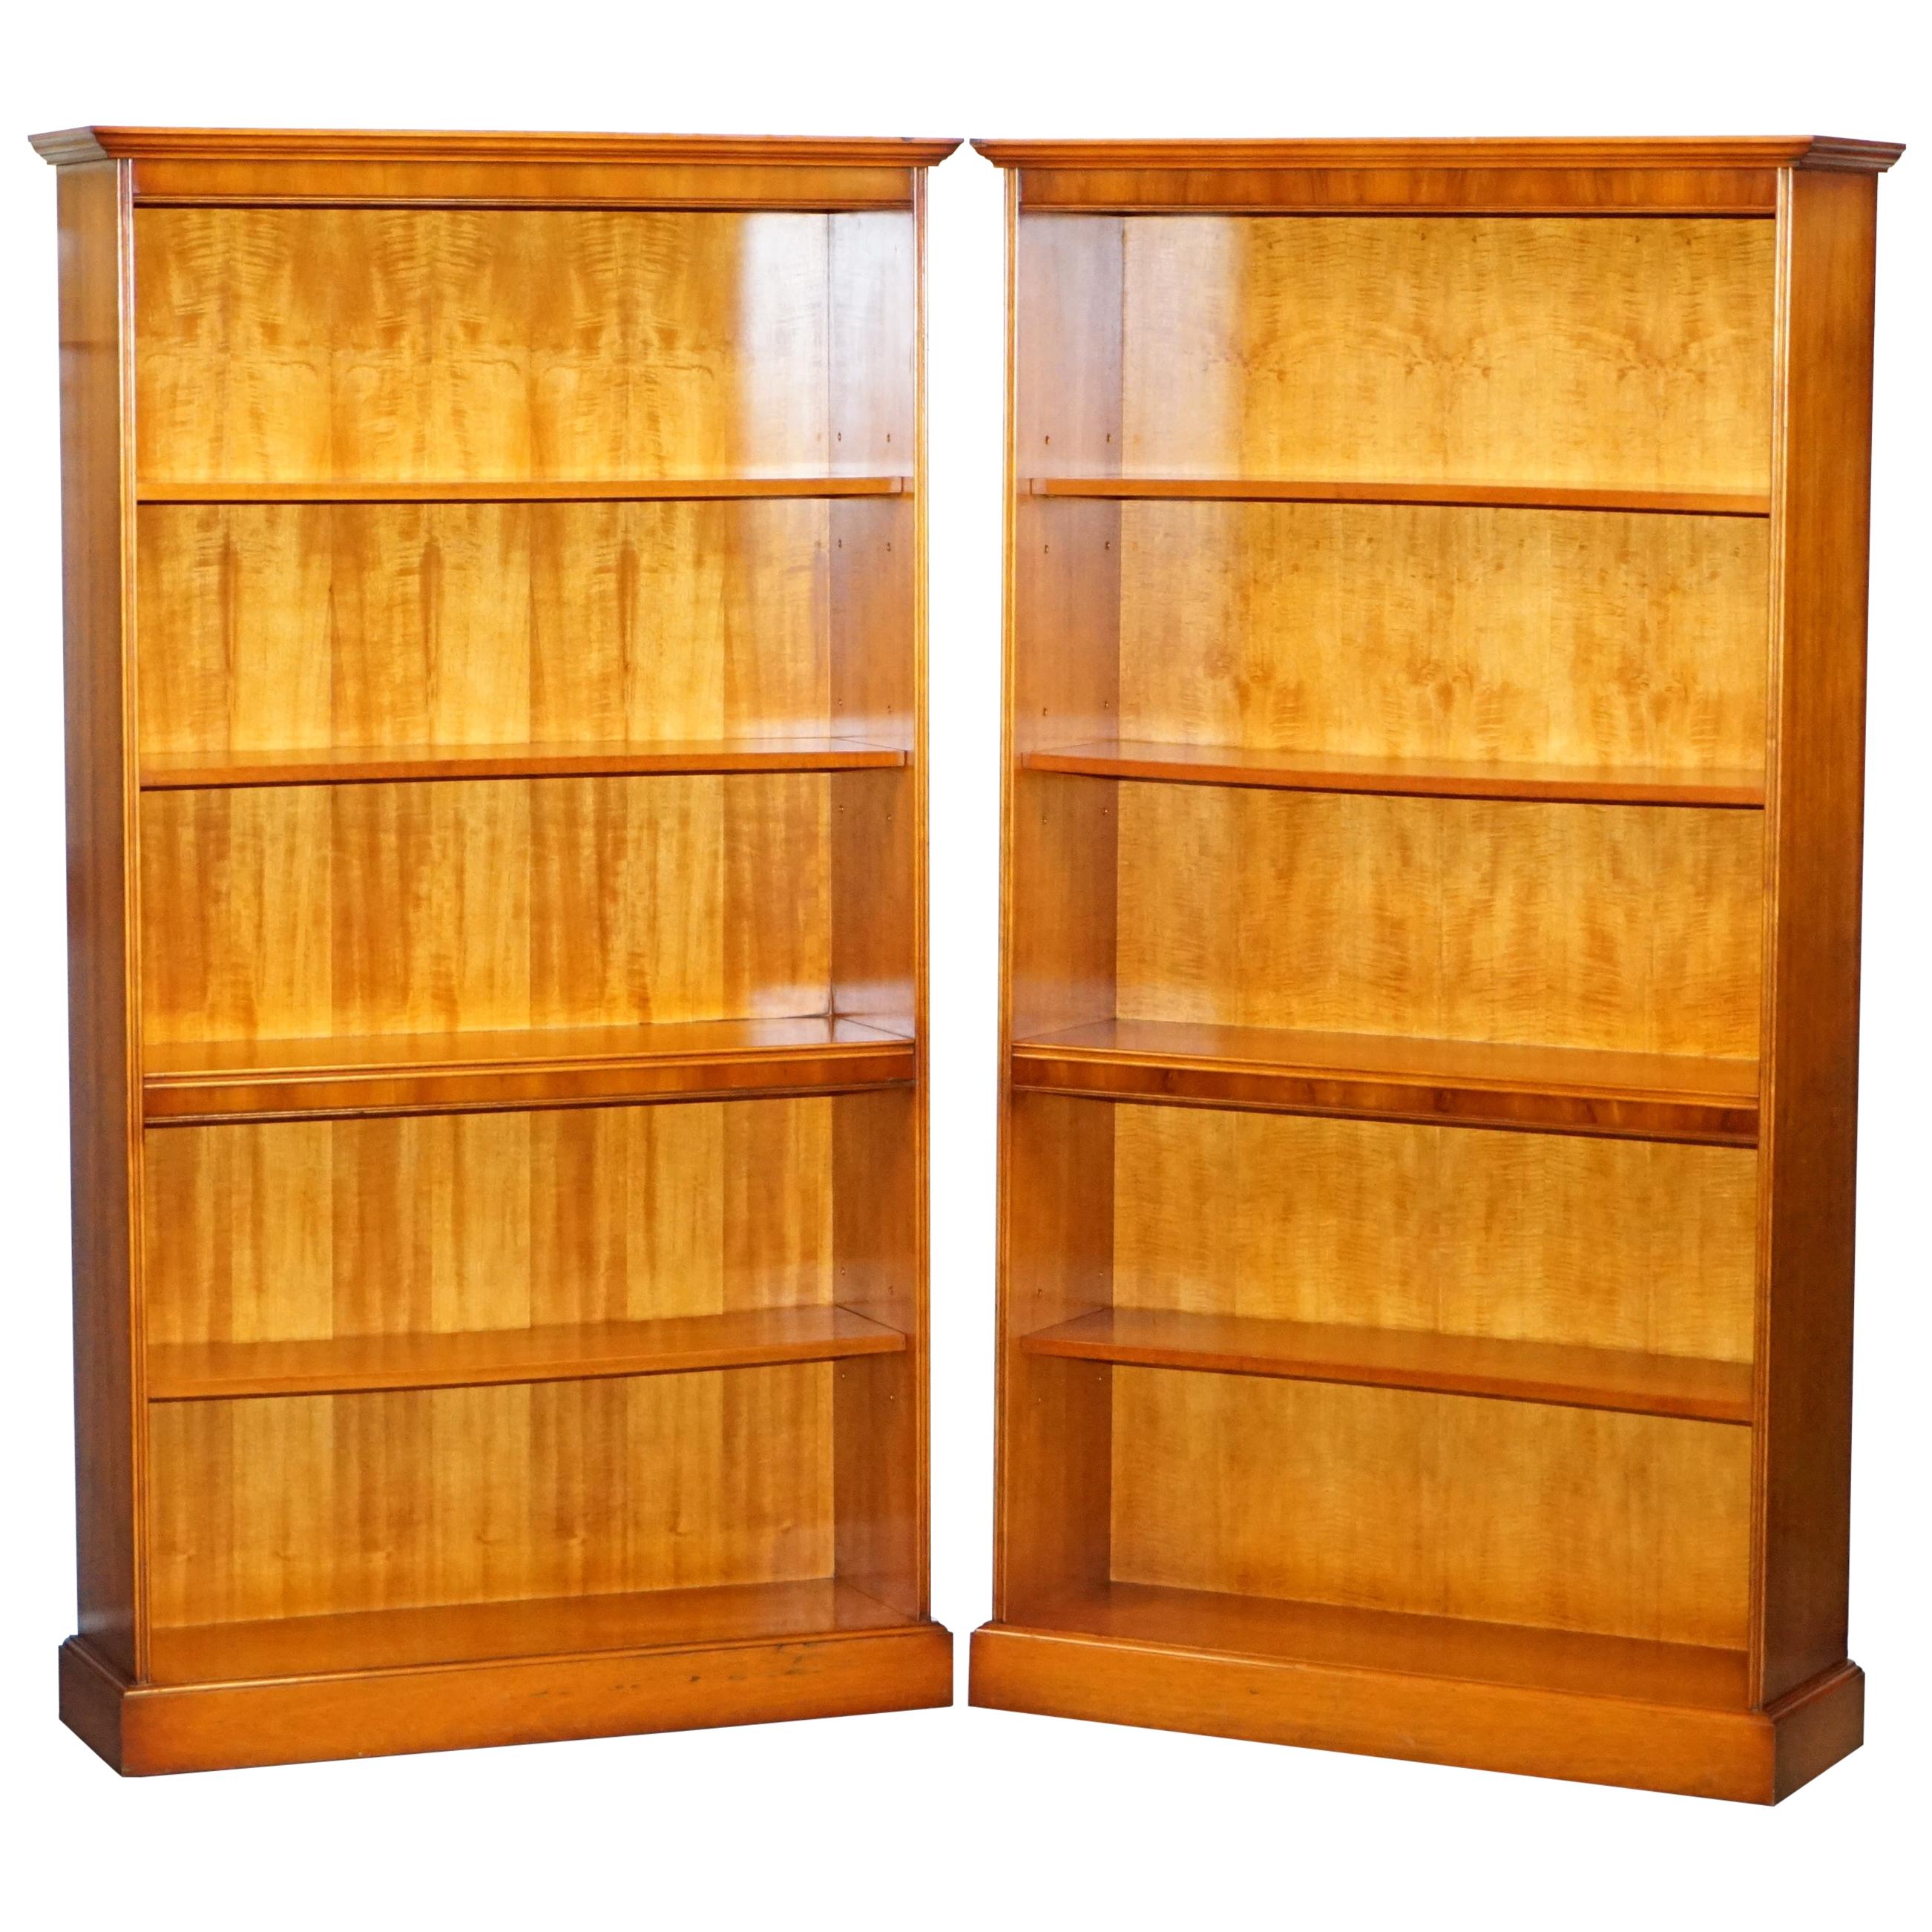 Lovely Matching Pair of Bradley Library Bookcases with Height Adjustable Shelves